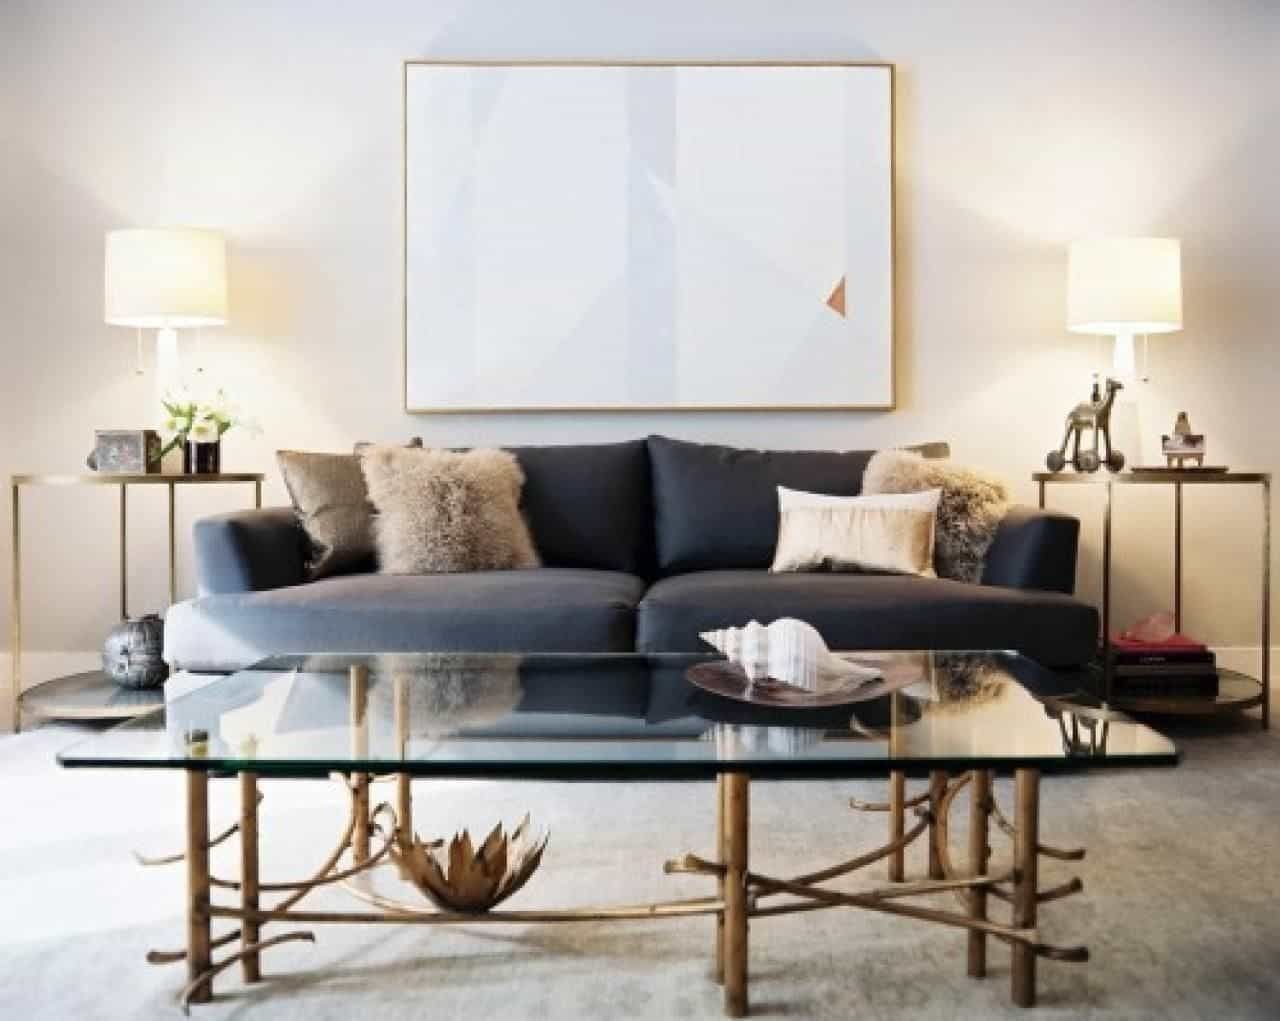 Modern Living Room With Grey Sofa And Side Tables With Table Lamps Throughout Modern Living Room Table Lamps (View 11 of 15)